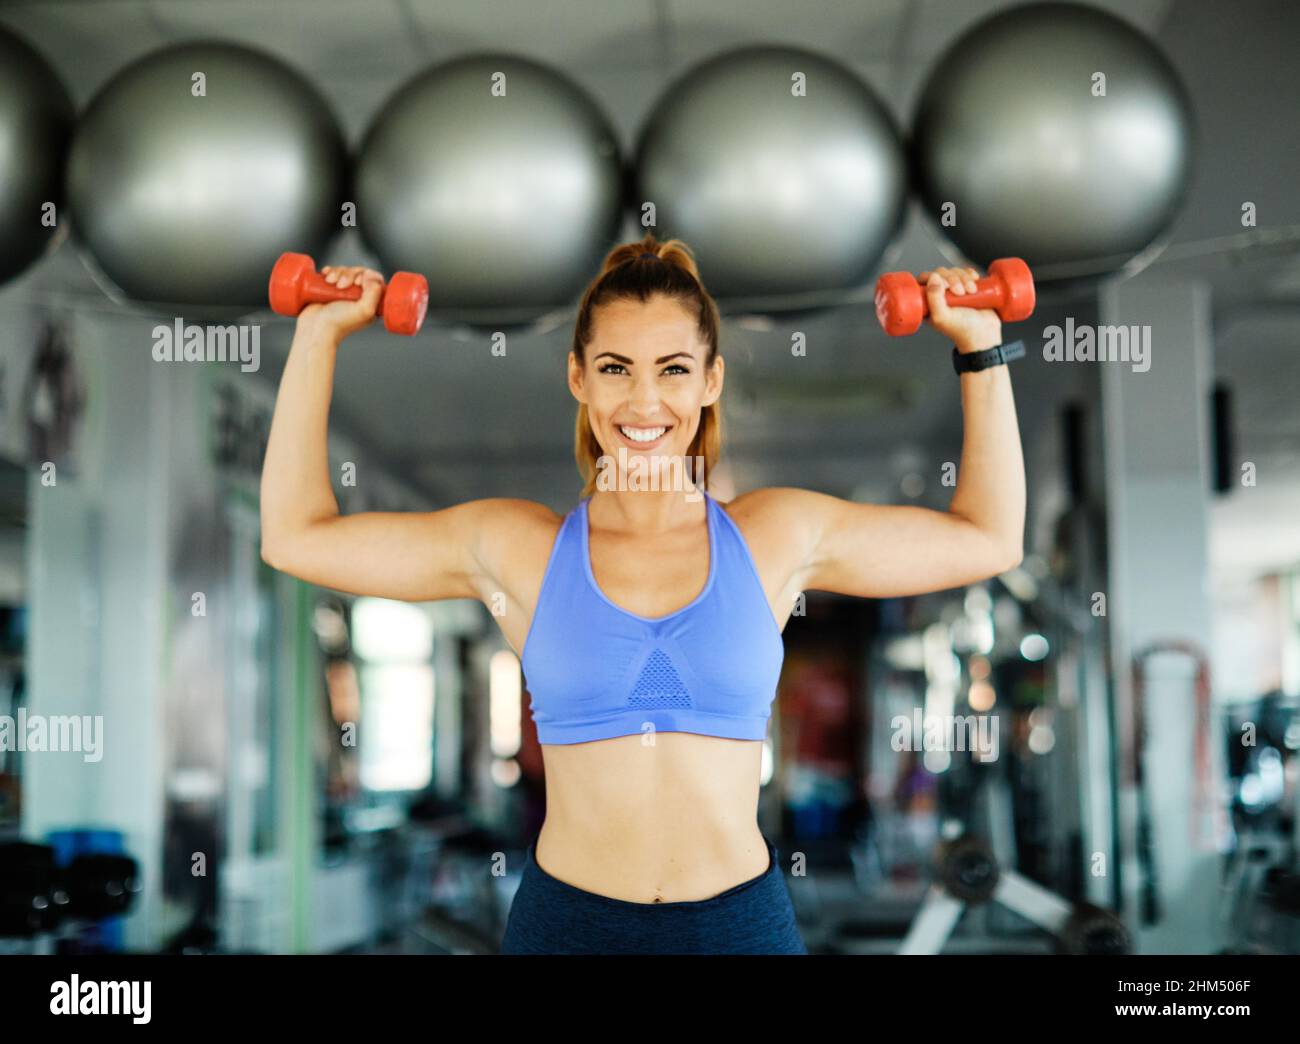 gym sport fitness exercise lifestyle athlete health training weight body healthy workout Stock Photo